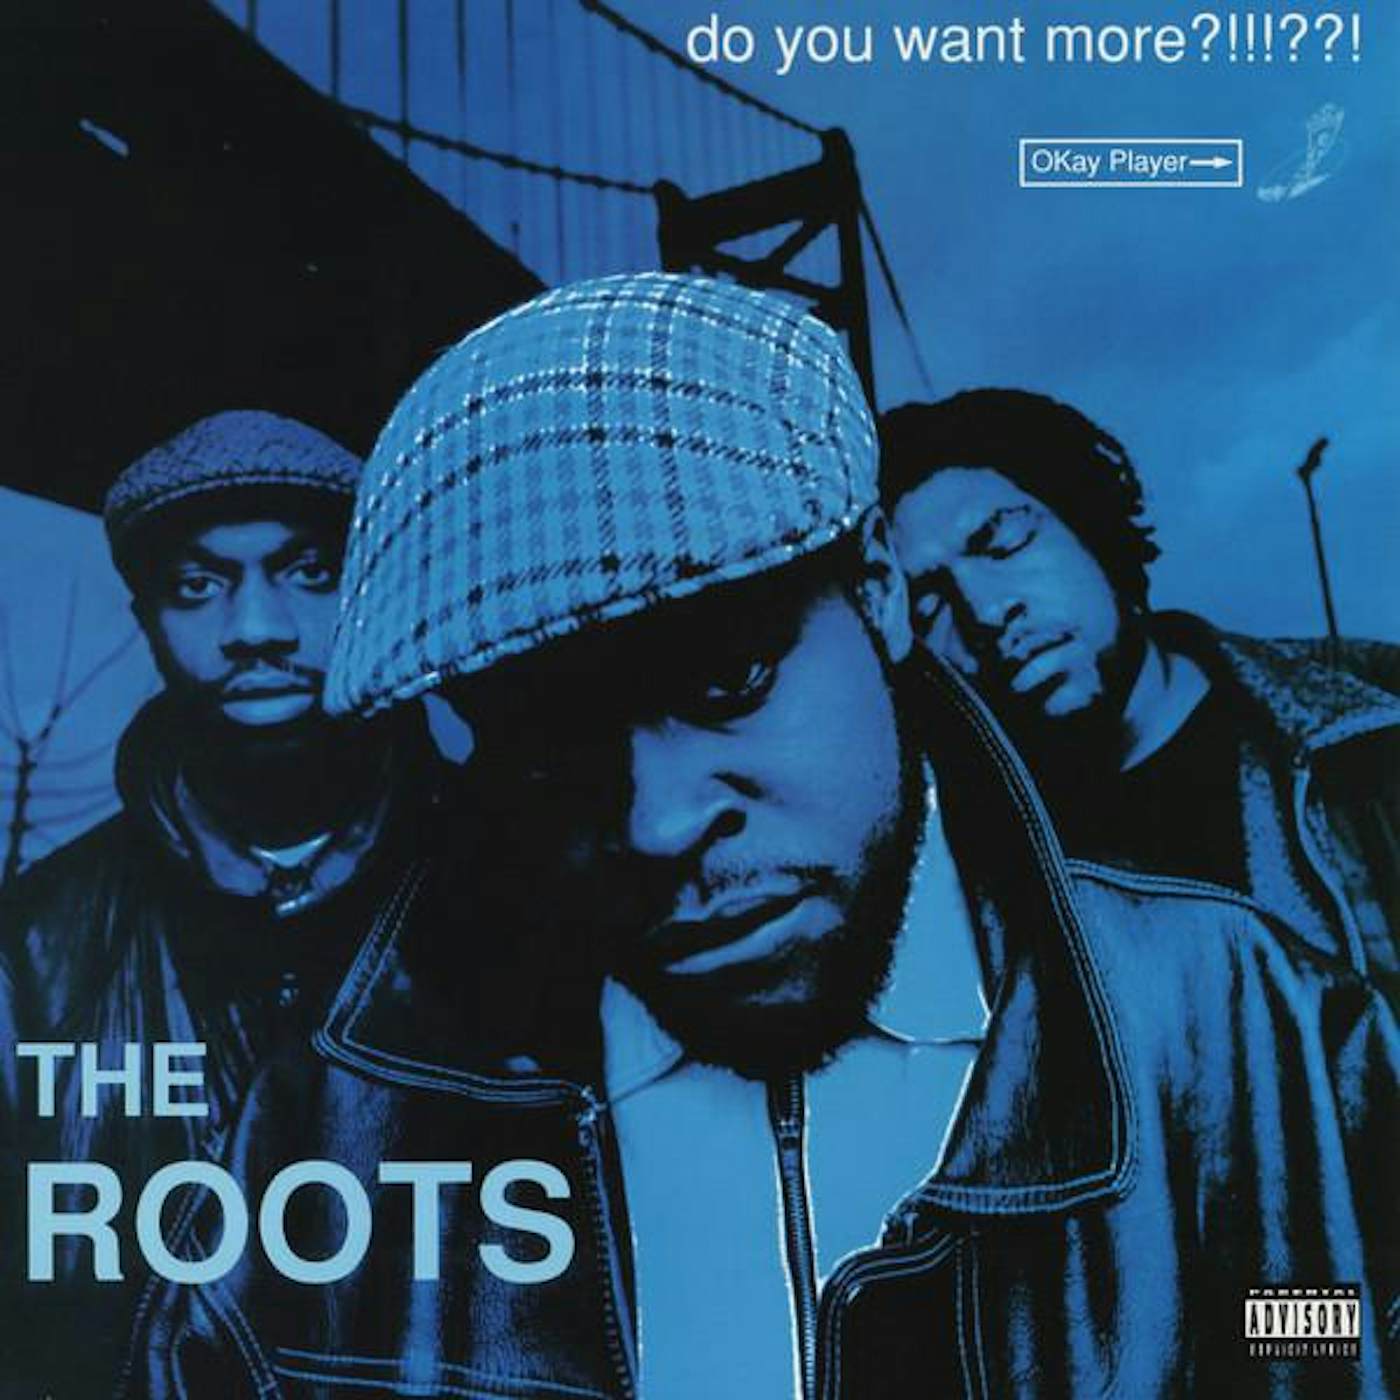 The Roots DO YOU WANT MORE (EXP) Vinyl Record